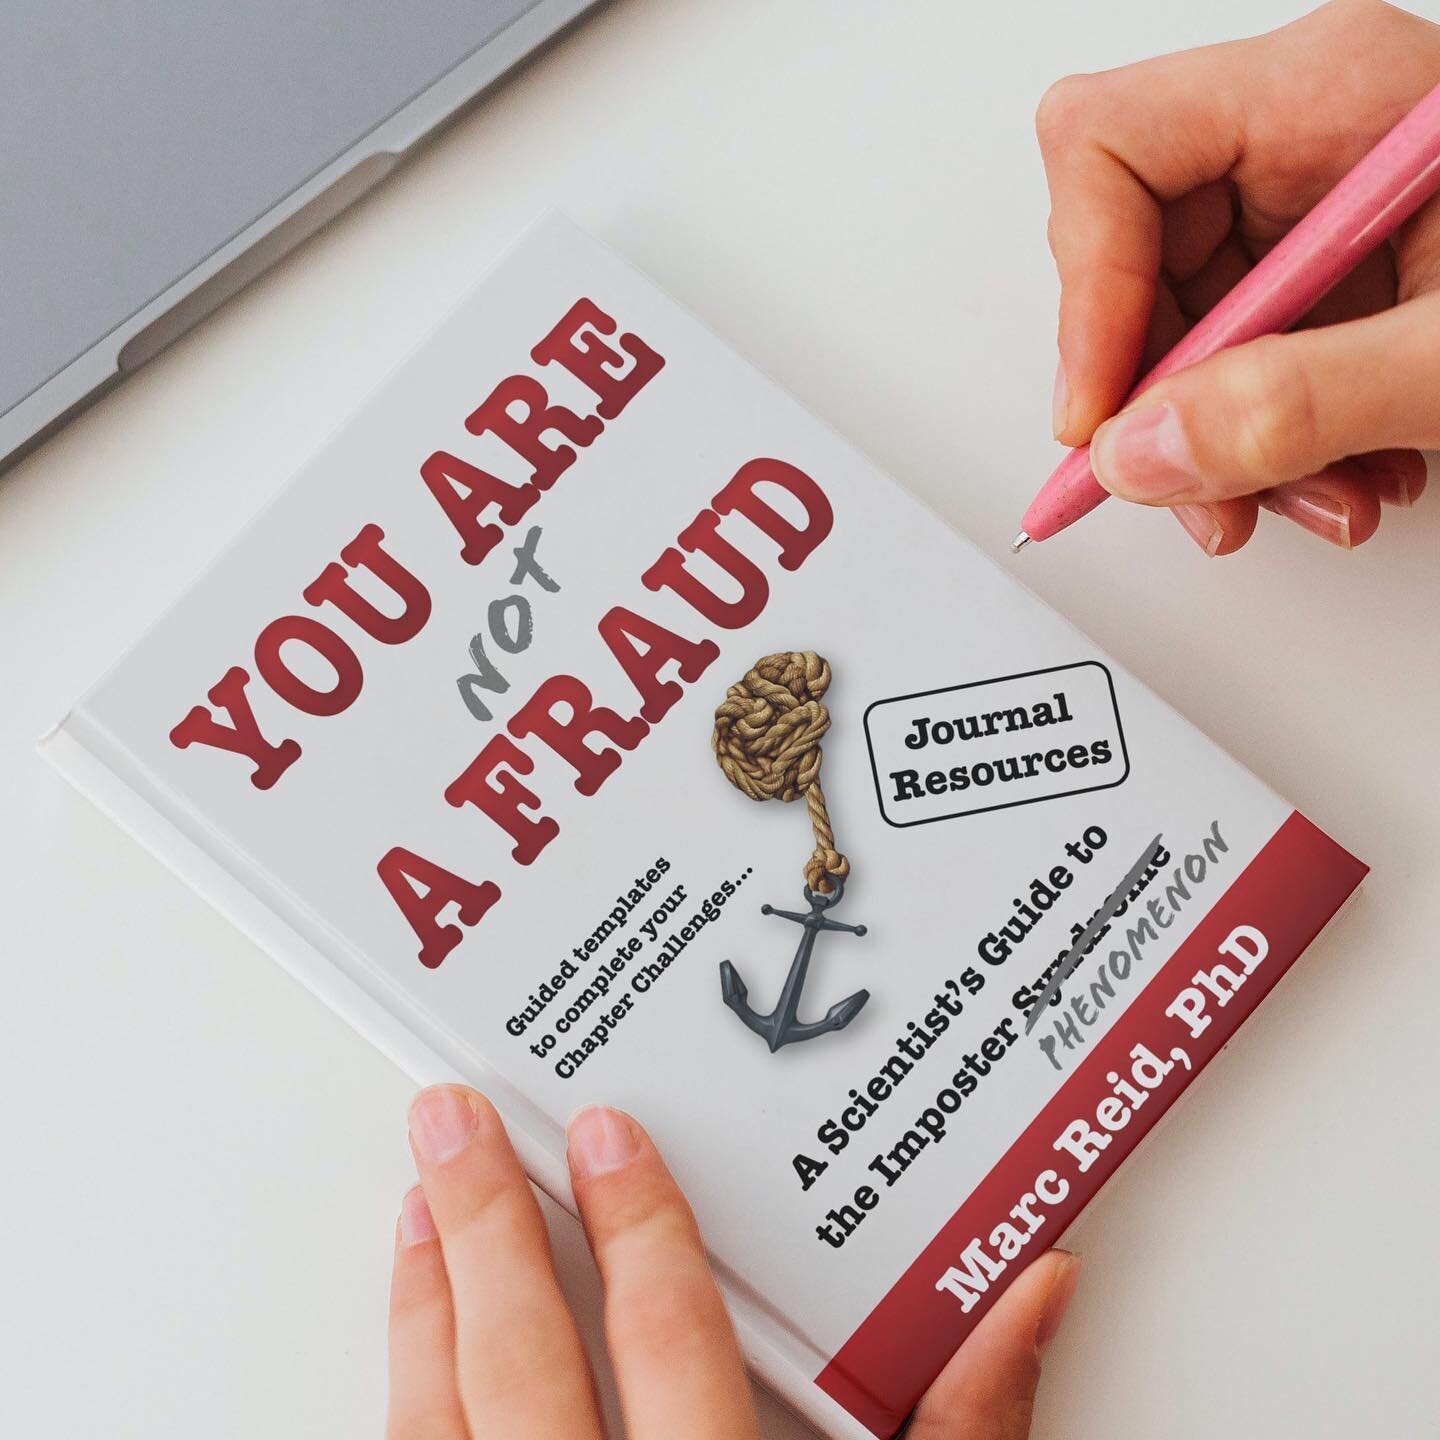 My book &lsquo;You Are (Not) a Fraud: A Scientist&rsquo;s Guide to the Imposter Phenomenon&rsquo; comes out later this summer.

At the same time, a journal resource accompaniment to the main book will be made available!

The core chapters of the book